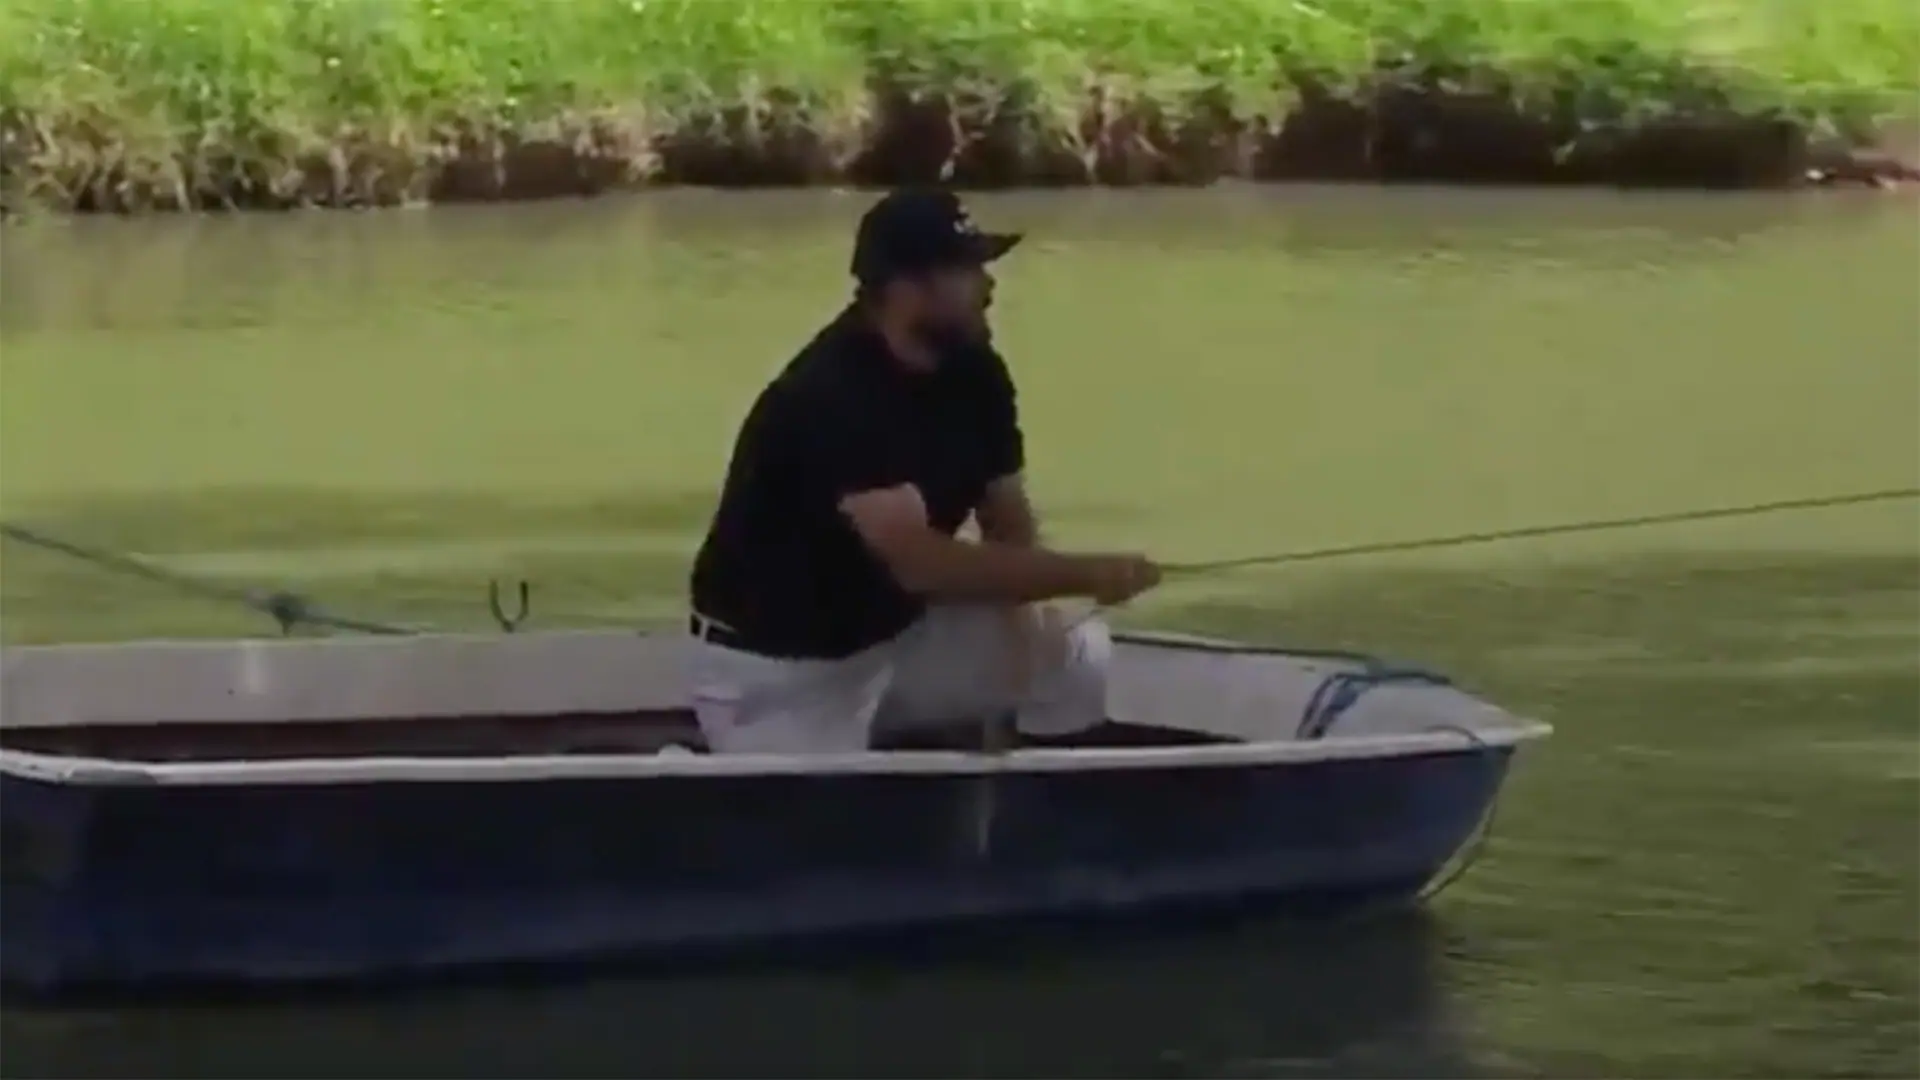 Watch: Euro Tour player uses boat to play shot from island